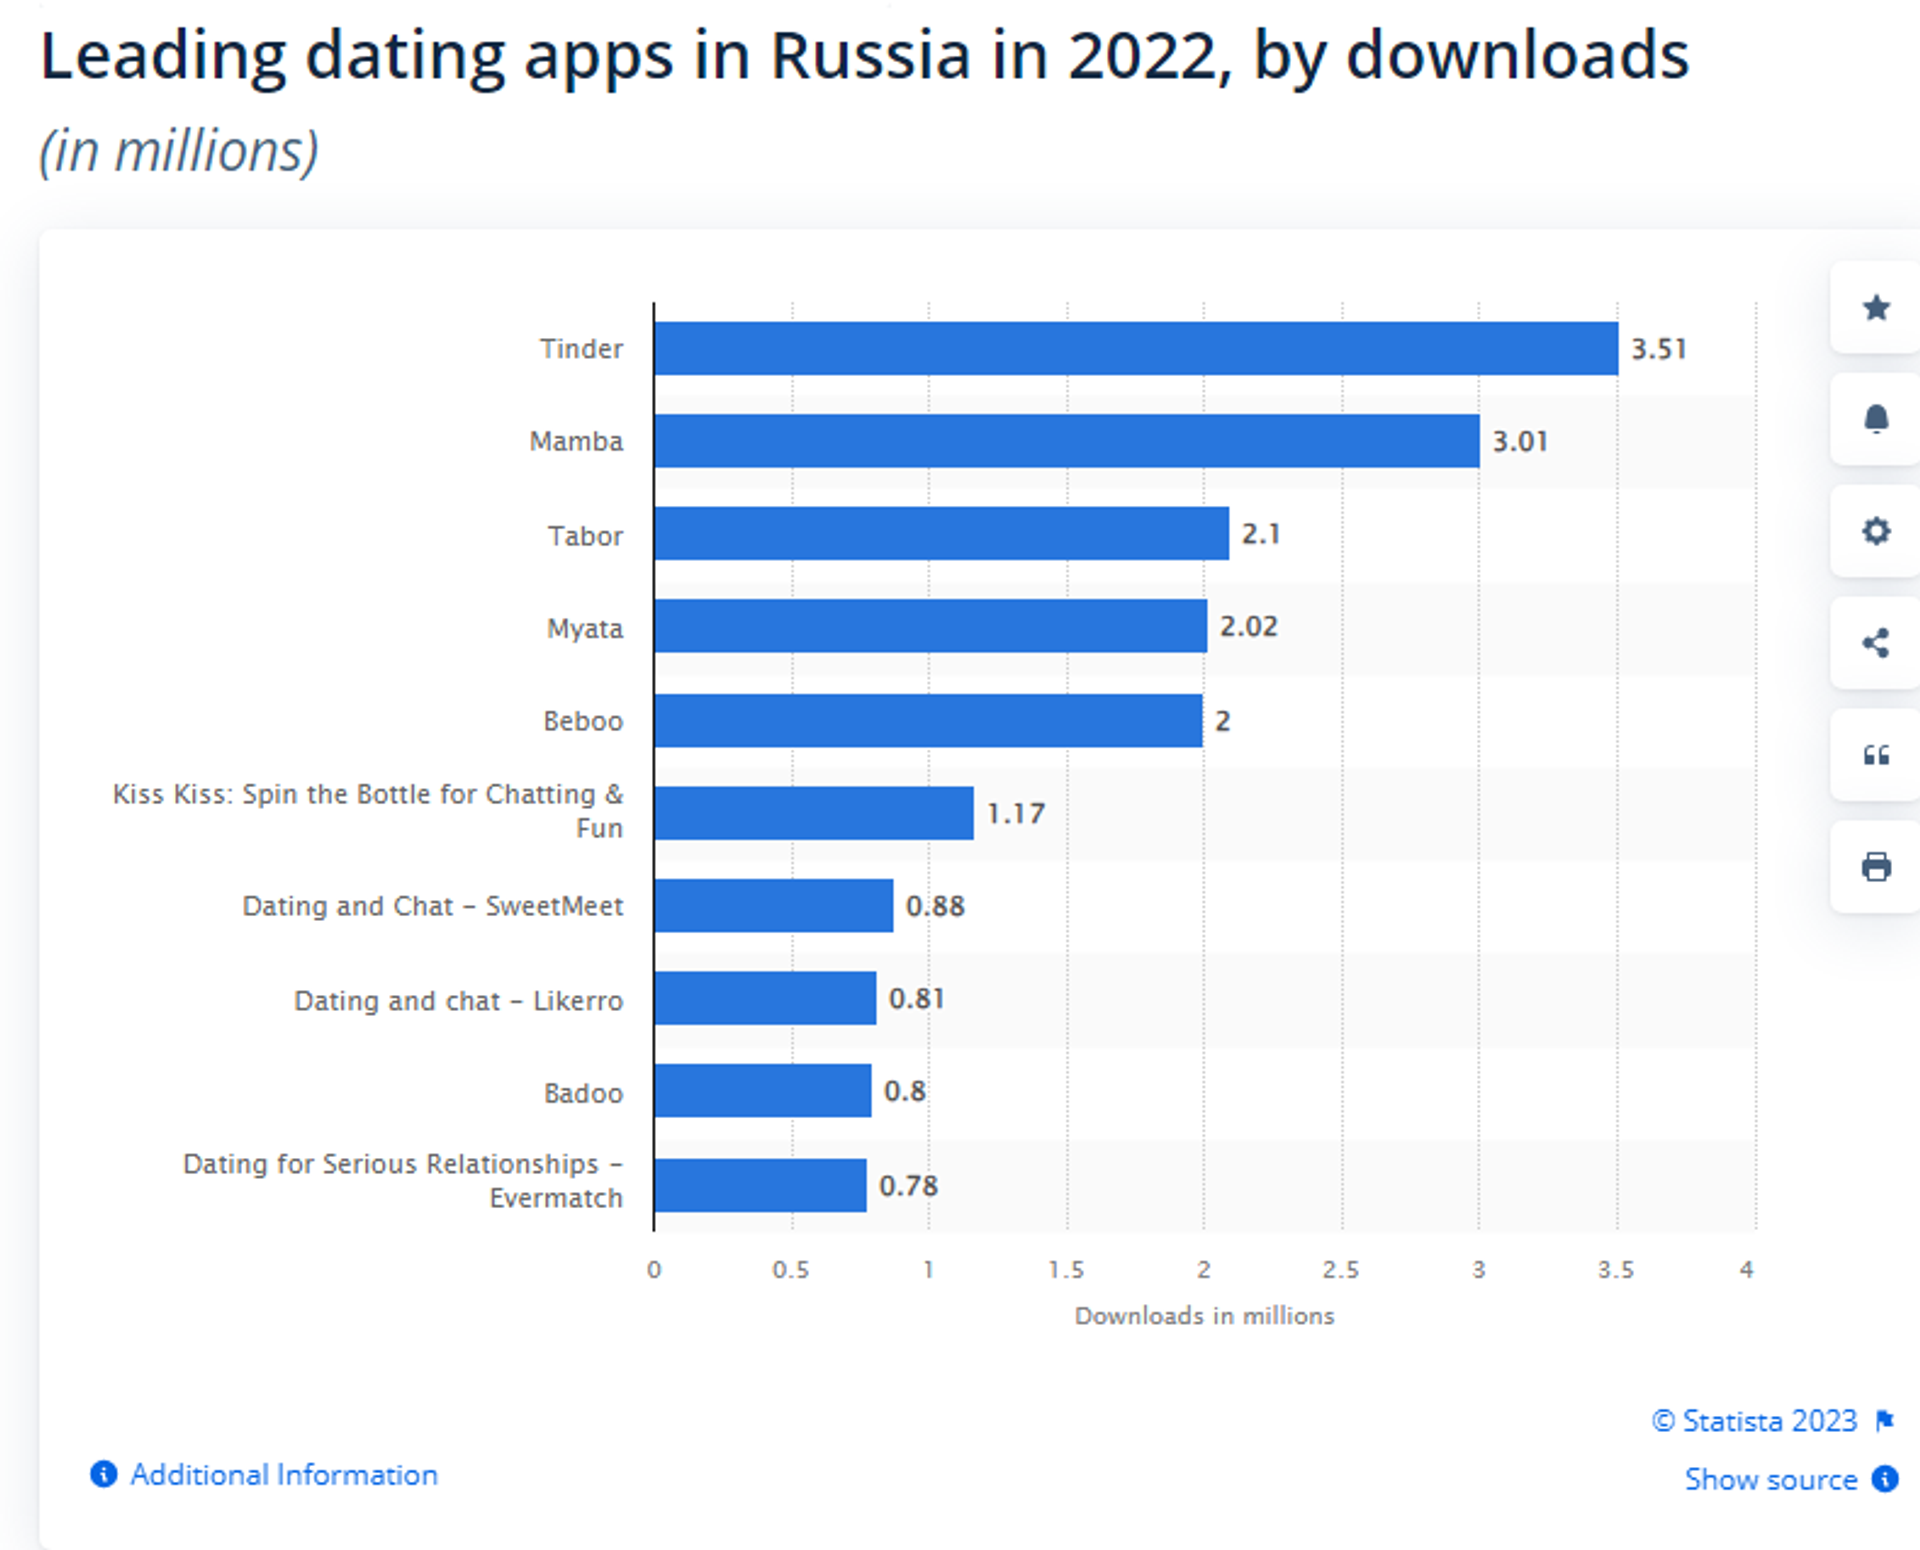 Screenshot of chart by  Statista Research Department showing most popular dating apps in Russia in 2022. - Sputnik International, 1920, 30.06.2023